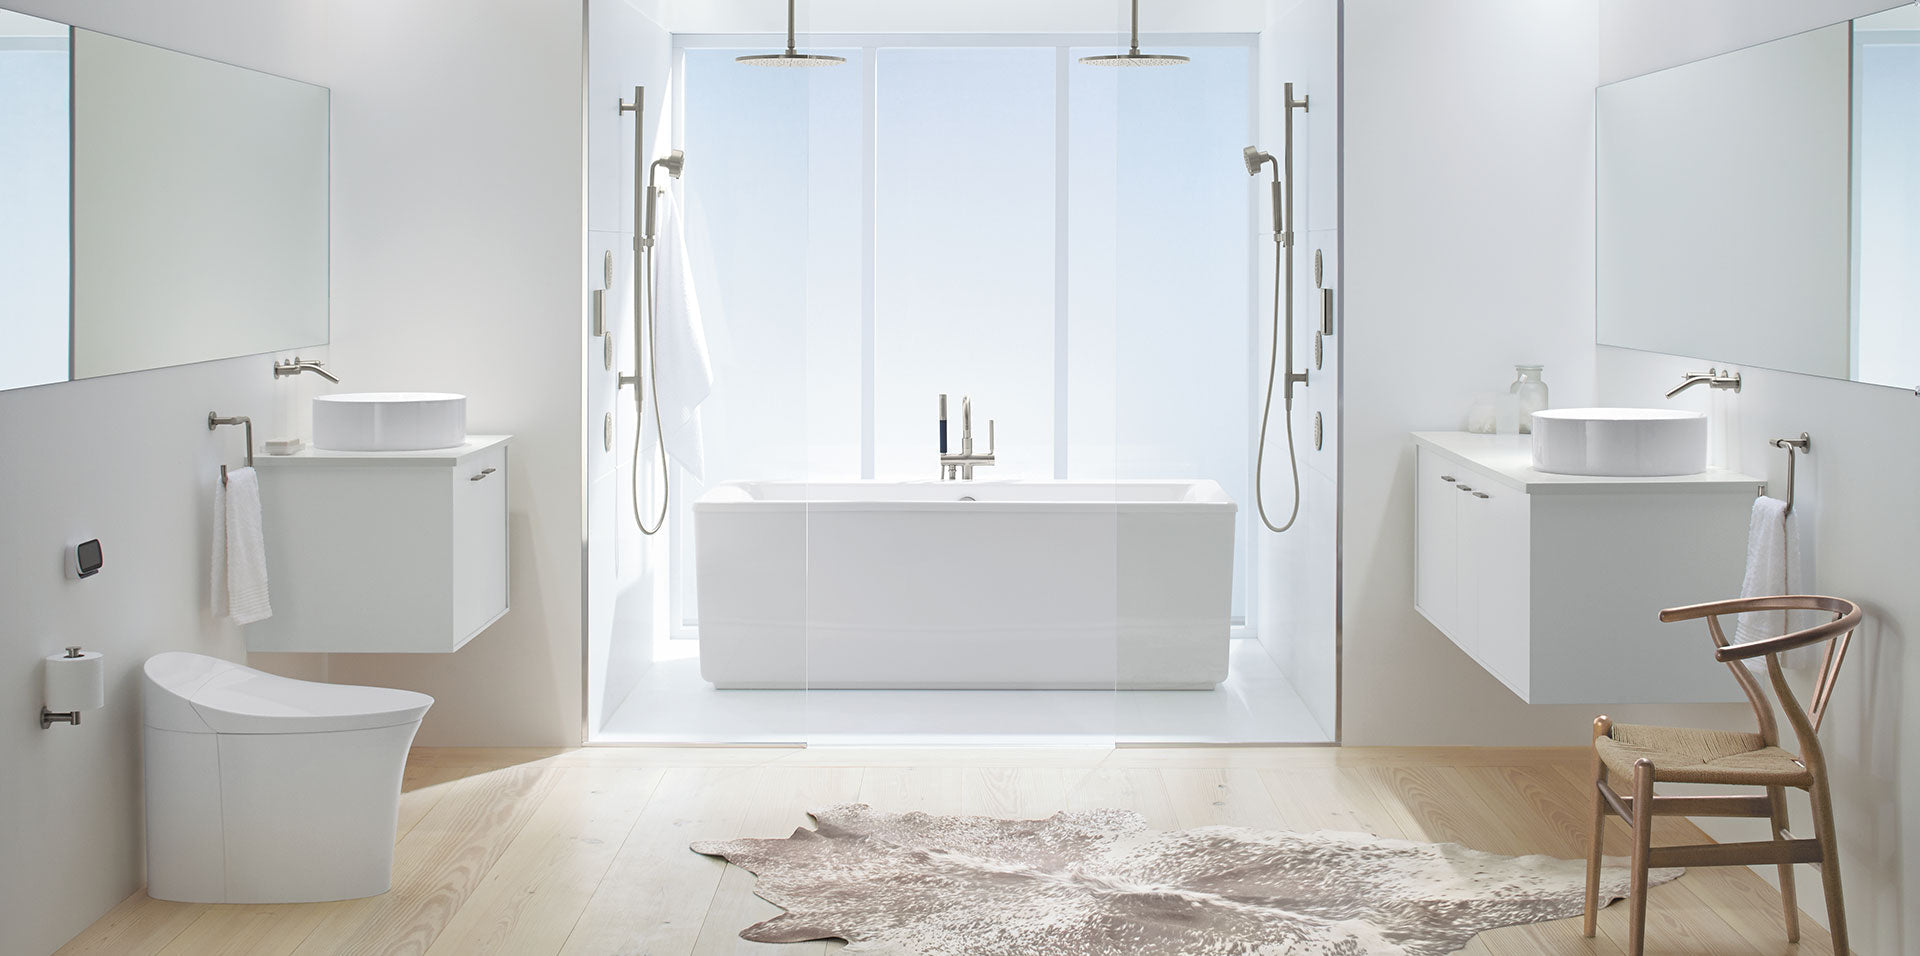 Shop for your entire bathroom at Reece Bath & Kitchen